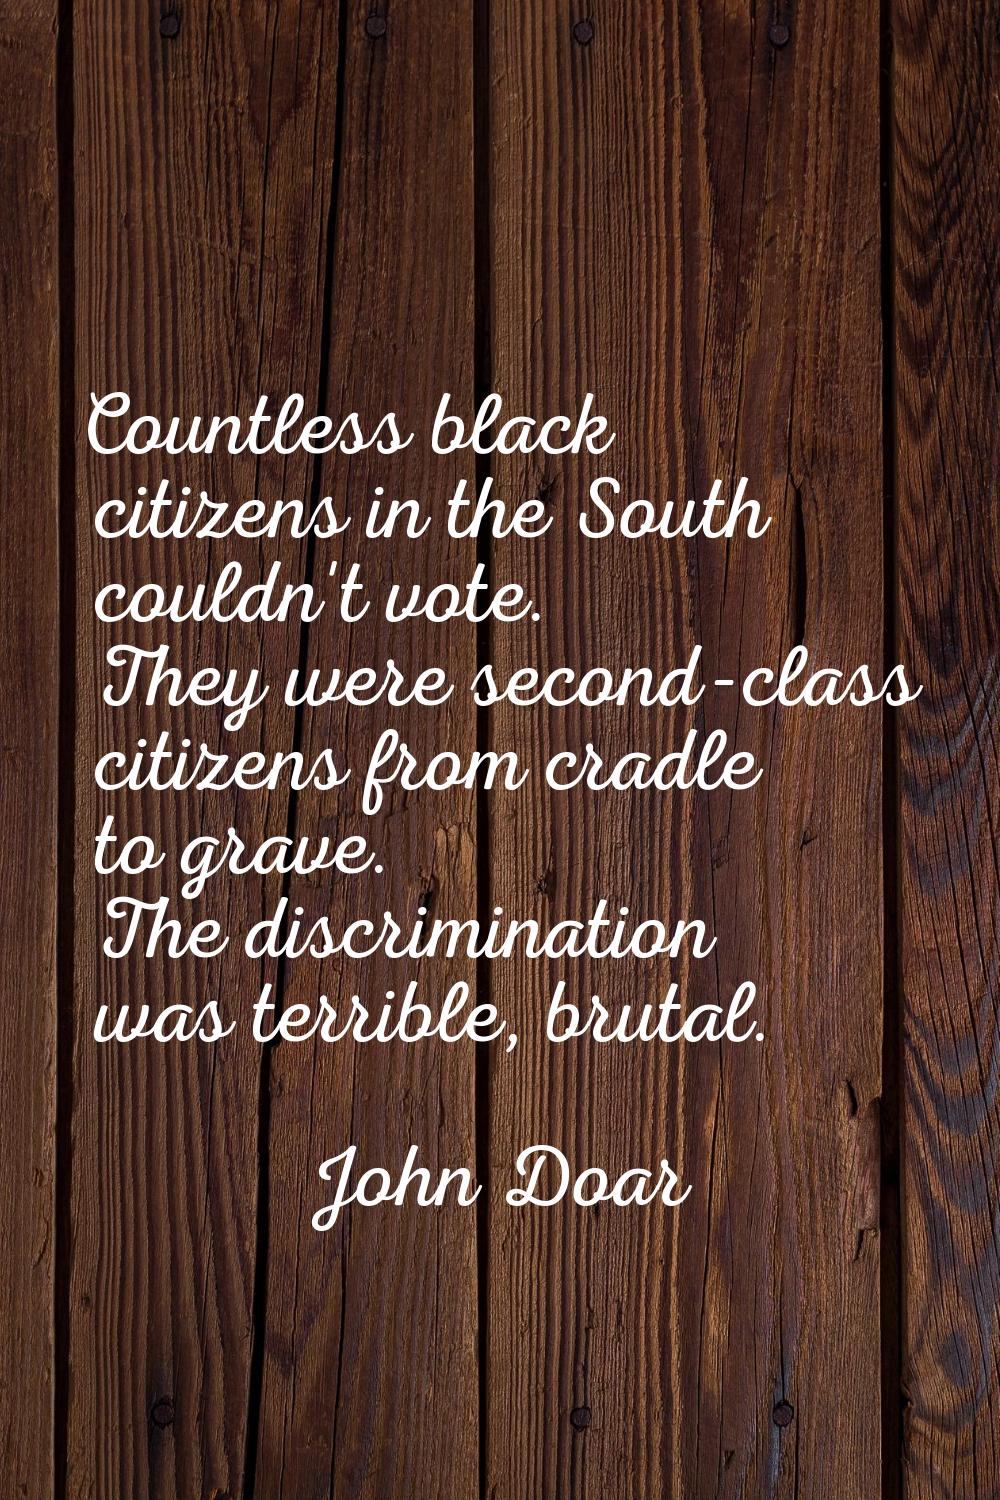 Countless black citizens in the South couldn't vote. They were second-class citizens from cradle to